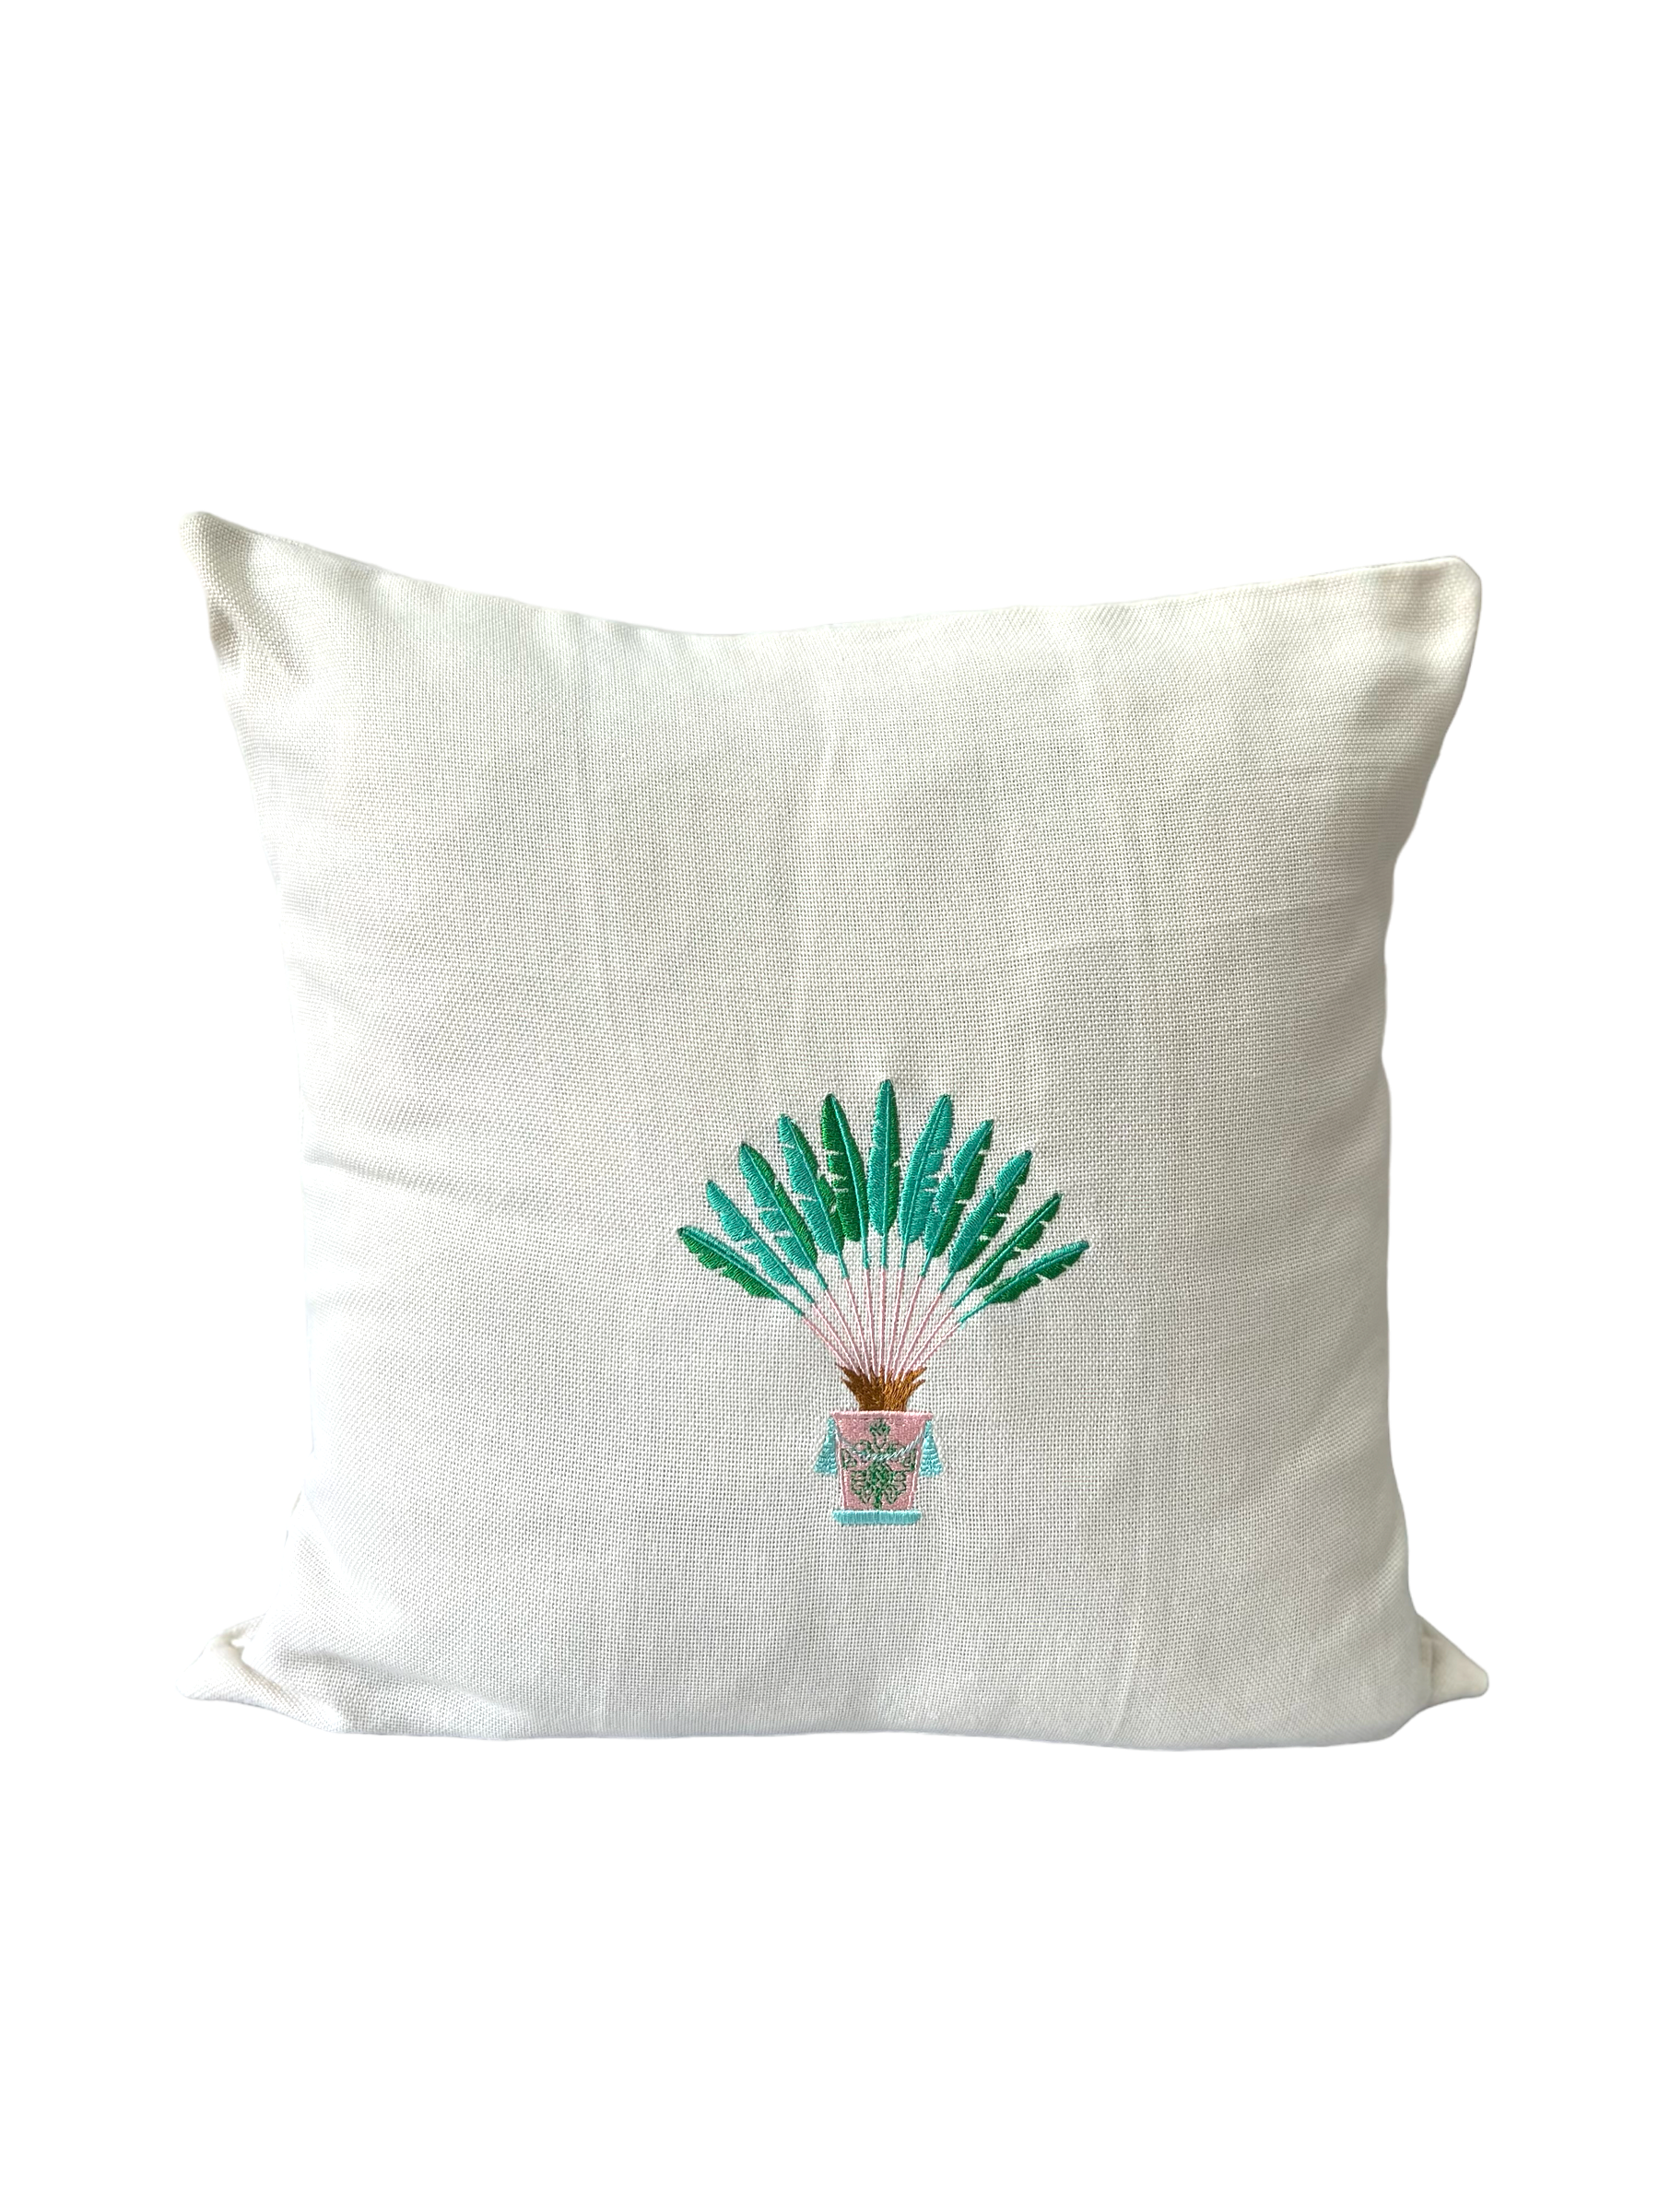 Embroidered palm cushion